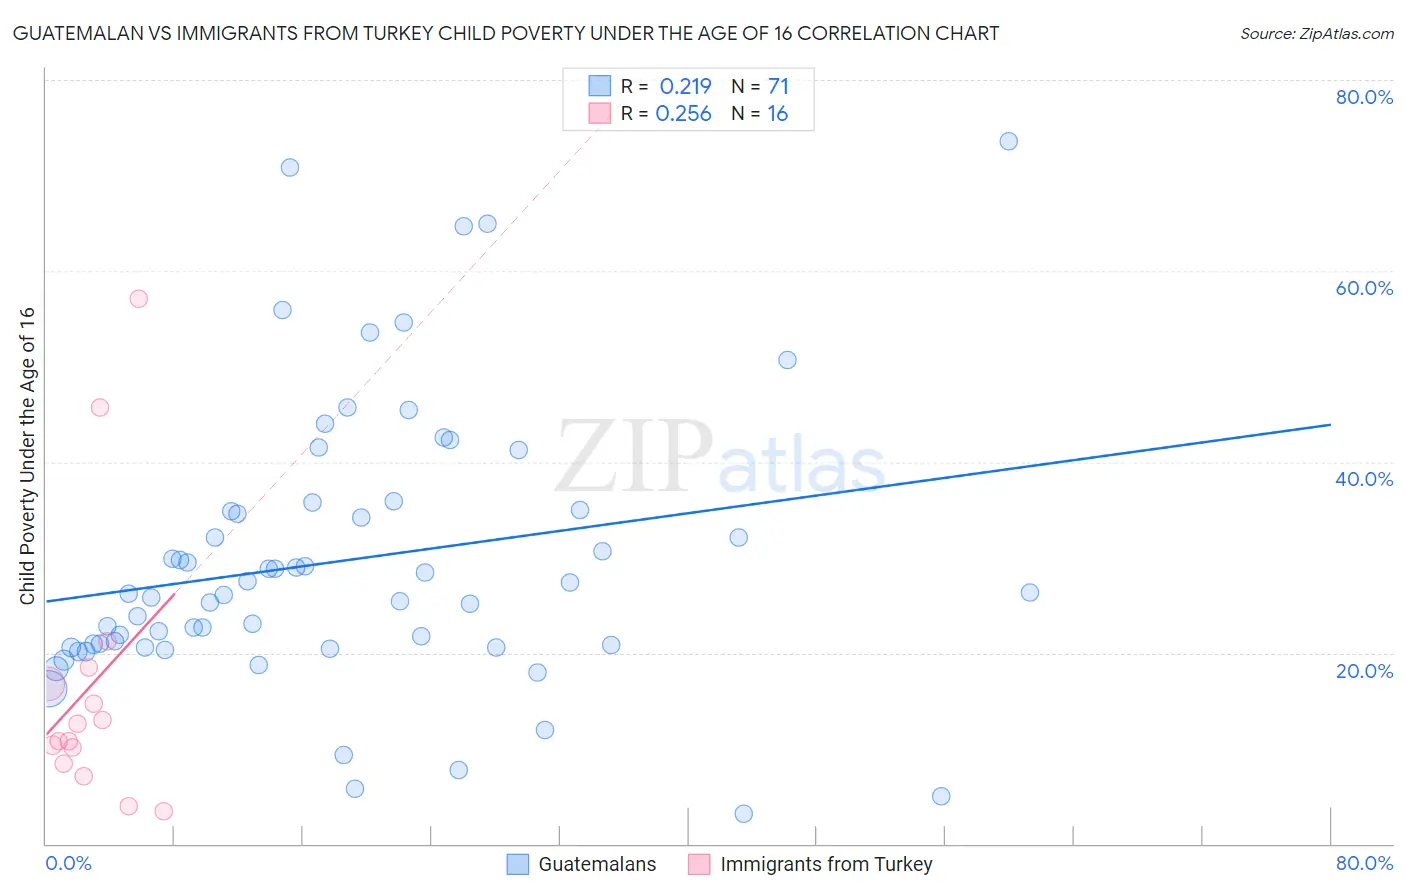 Guatemalan vs Immigrants from Turkey Child Poverty Under the Age of 16